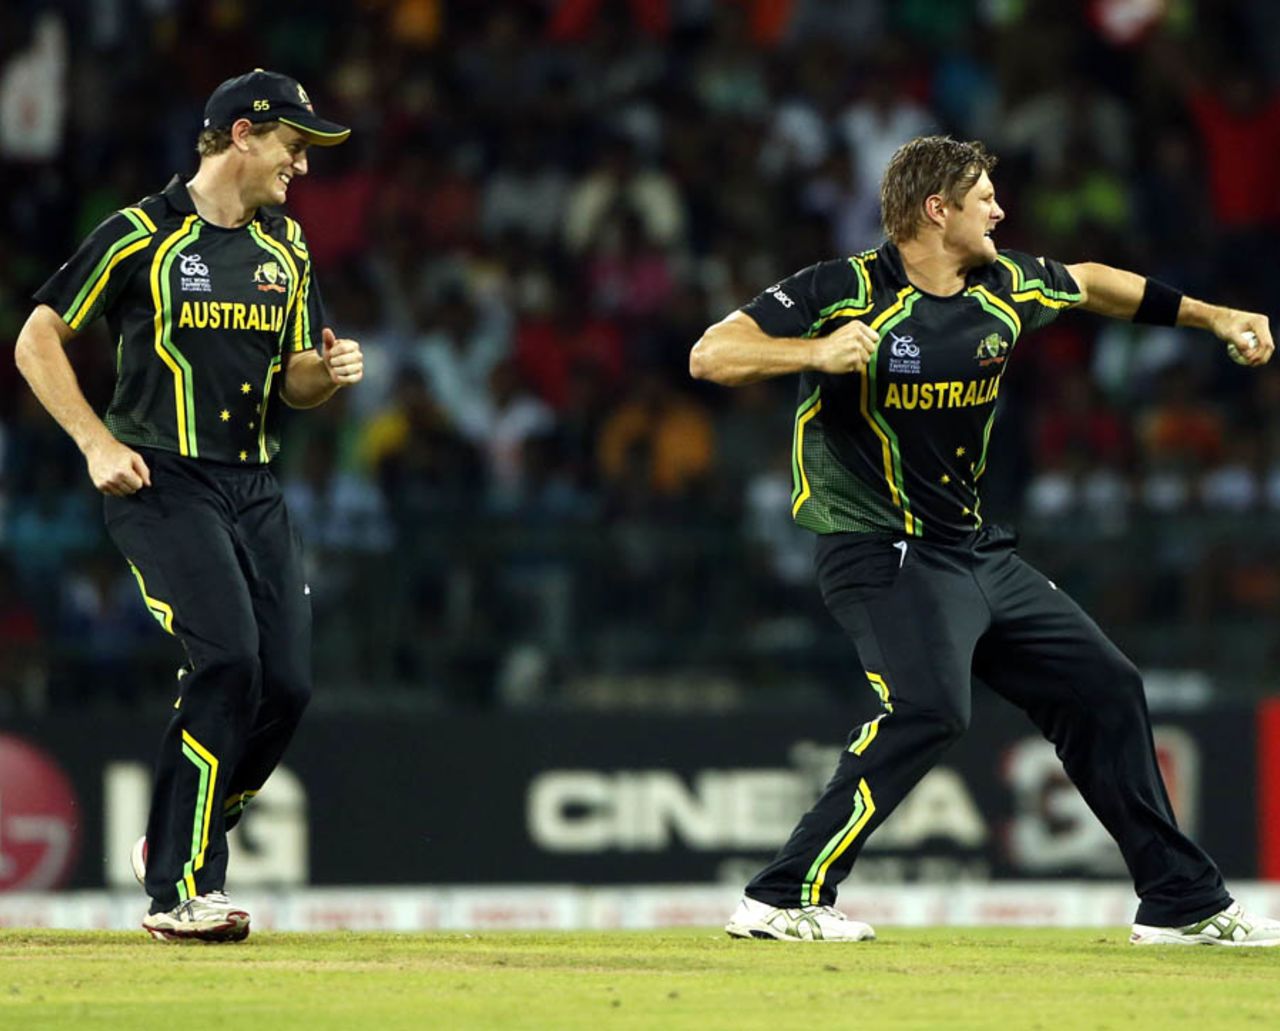 Shane Watson reacts after taking a wicket, Australia v West Indies, World Twenty20 2012, Group B, Colombo, September 22, 2012